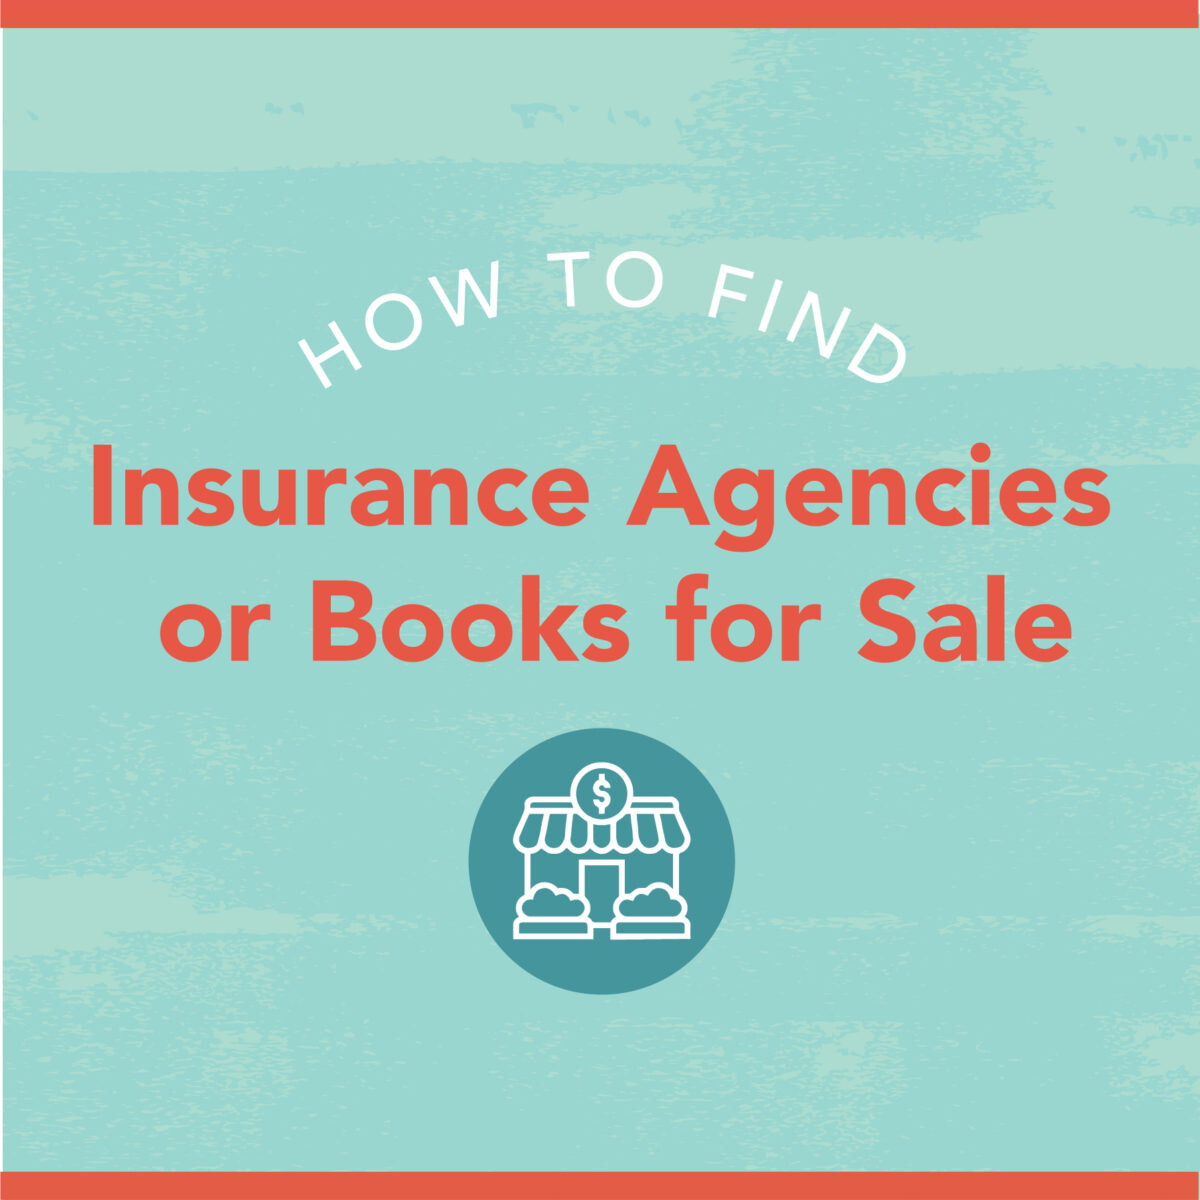 how to find insurance agencies or books for sale graphic